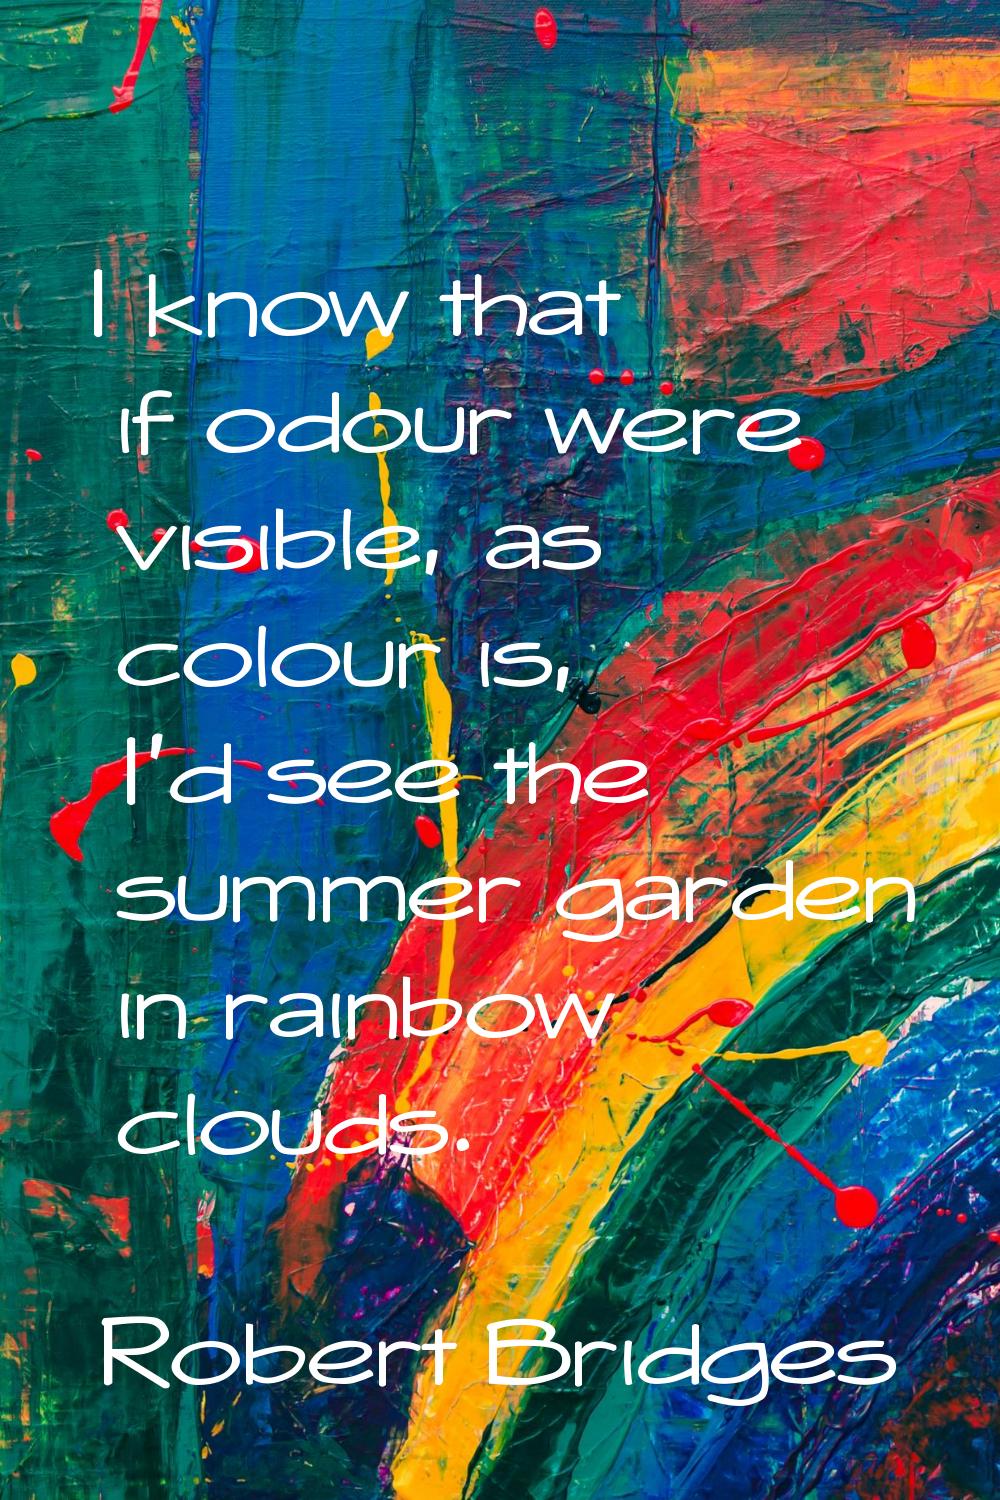 I know that if odour were visible, as colour is, I'd see the summer garden in rainbow clouds.